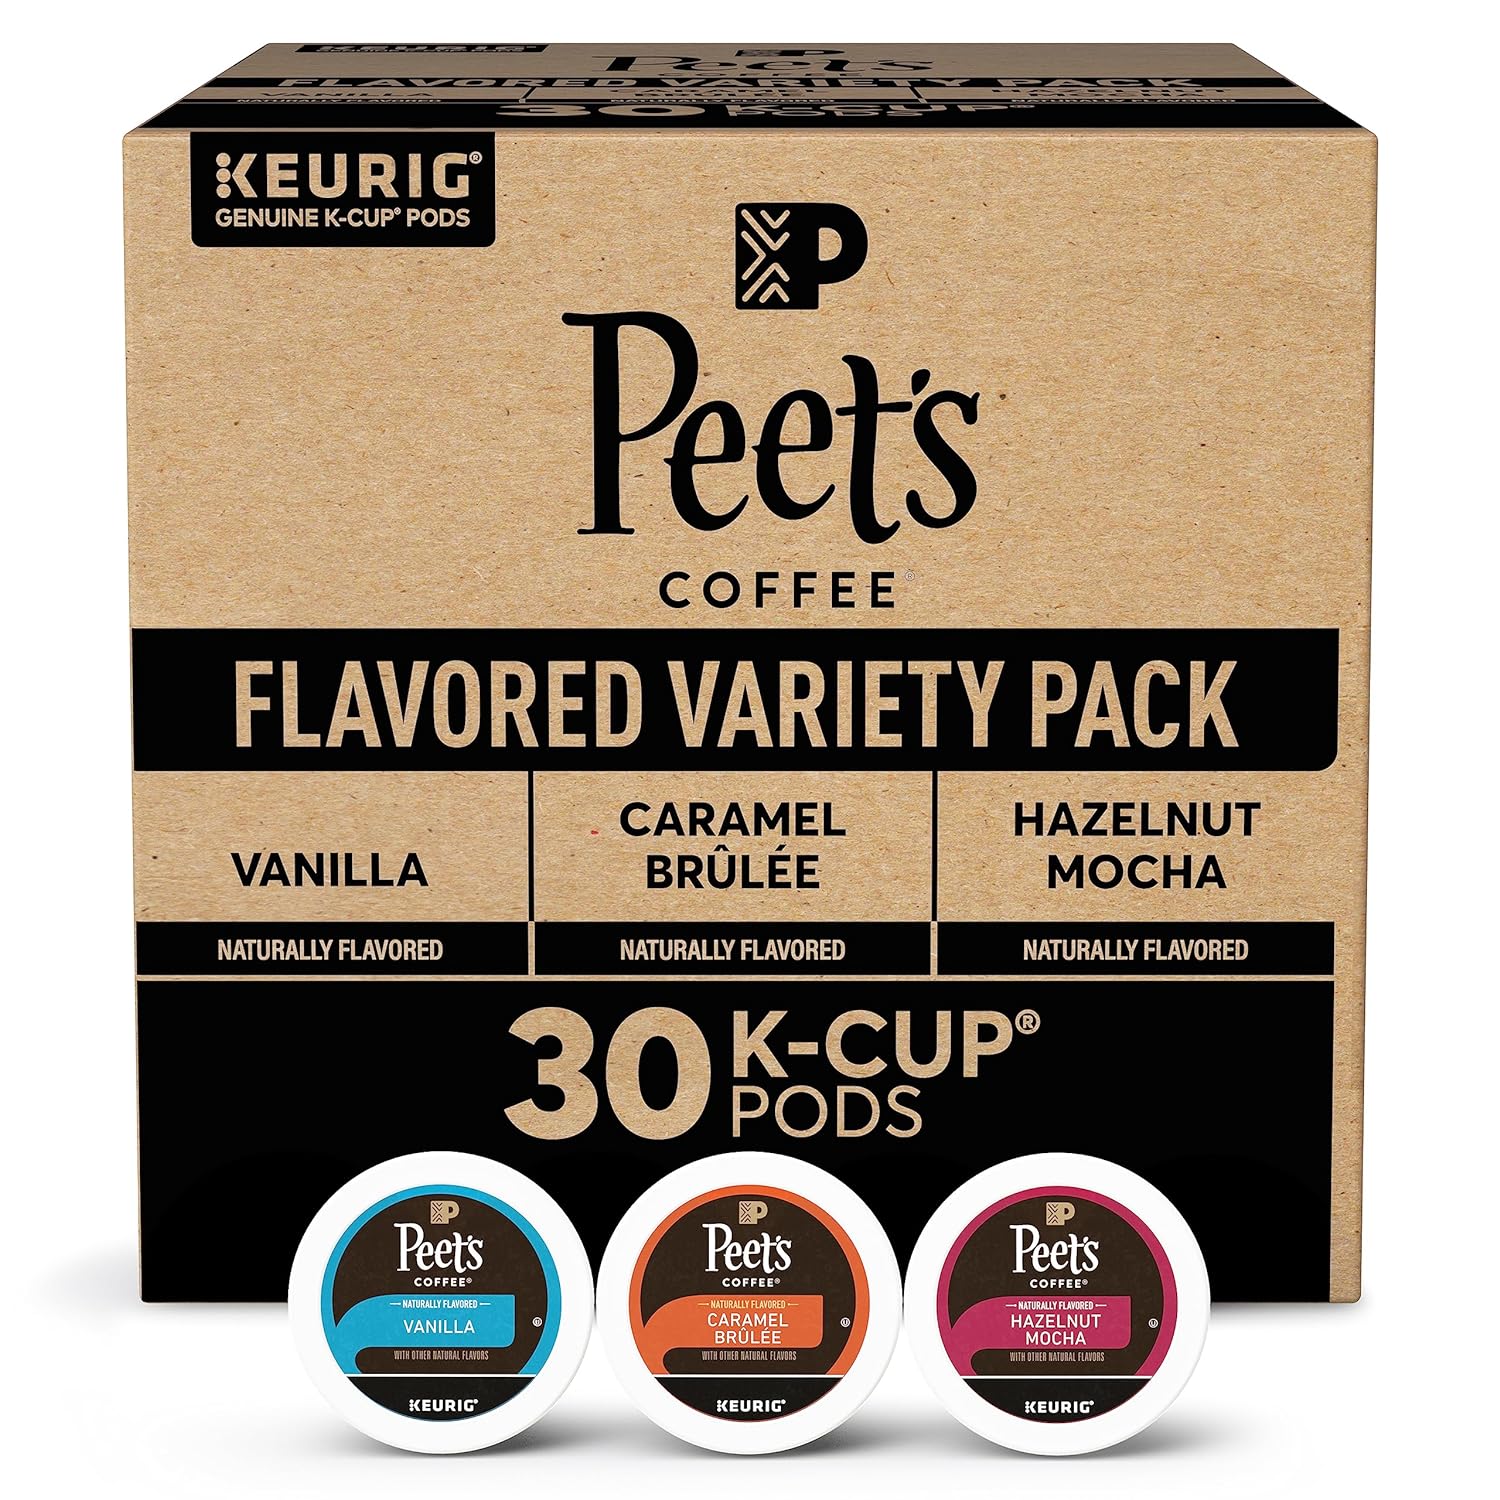 Peet's Coffee, Flavored Coffee K-Cup Pods for Keurig Brewers - Variety Pack, Vanilla Cinnamon, Hazelnut Mocha, Caramel Brûlée, 30 Count (3 Boxes of 10 K-Cup Pods)